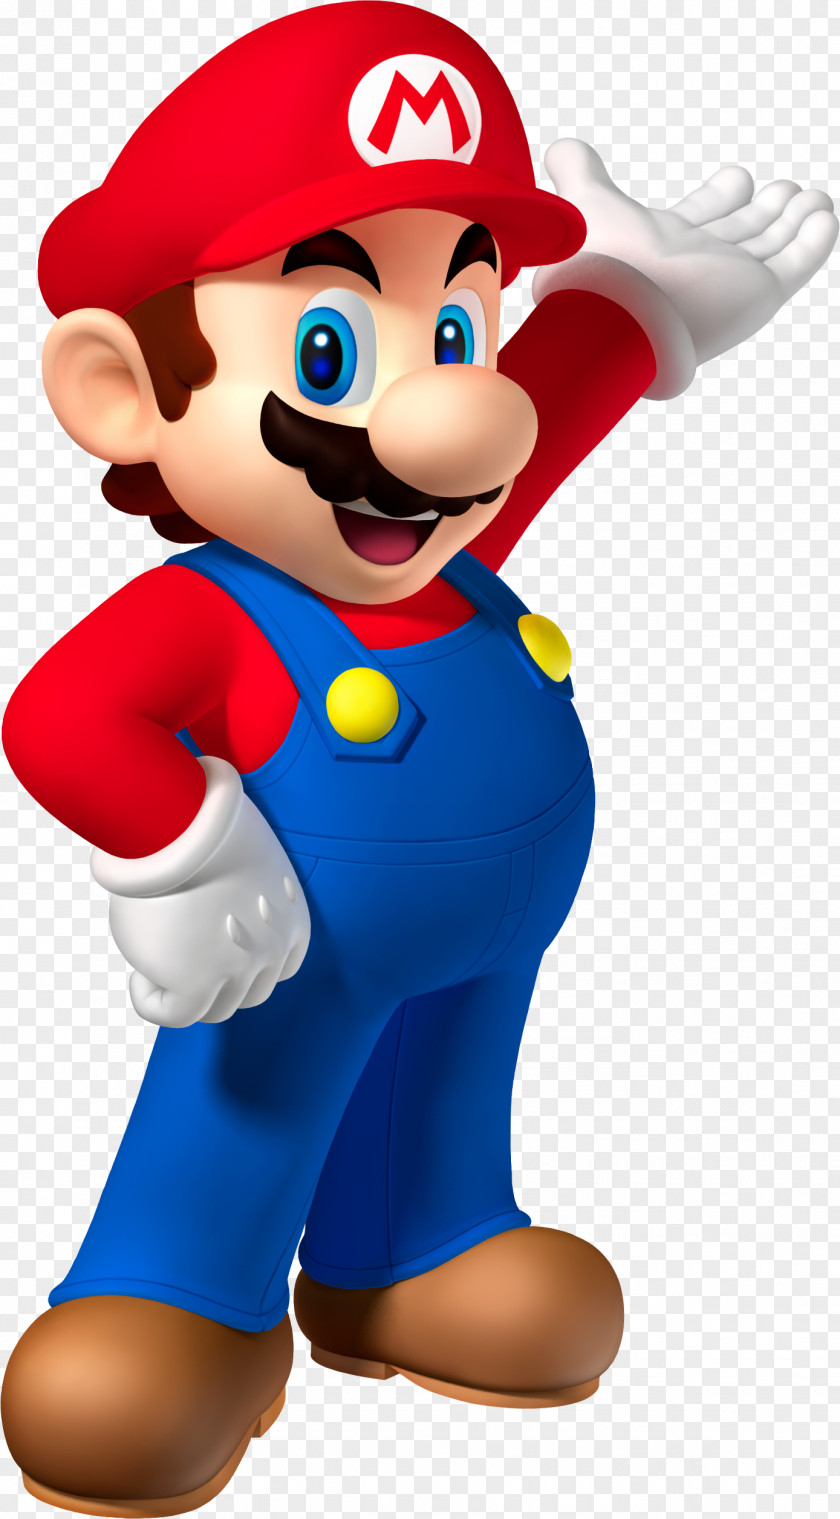 Mario Super Smash Bros. For Nintendo 3DS And Wii U Entertainment System Club PNG